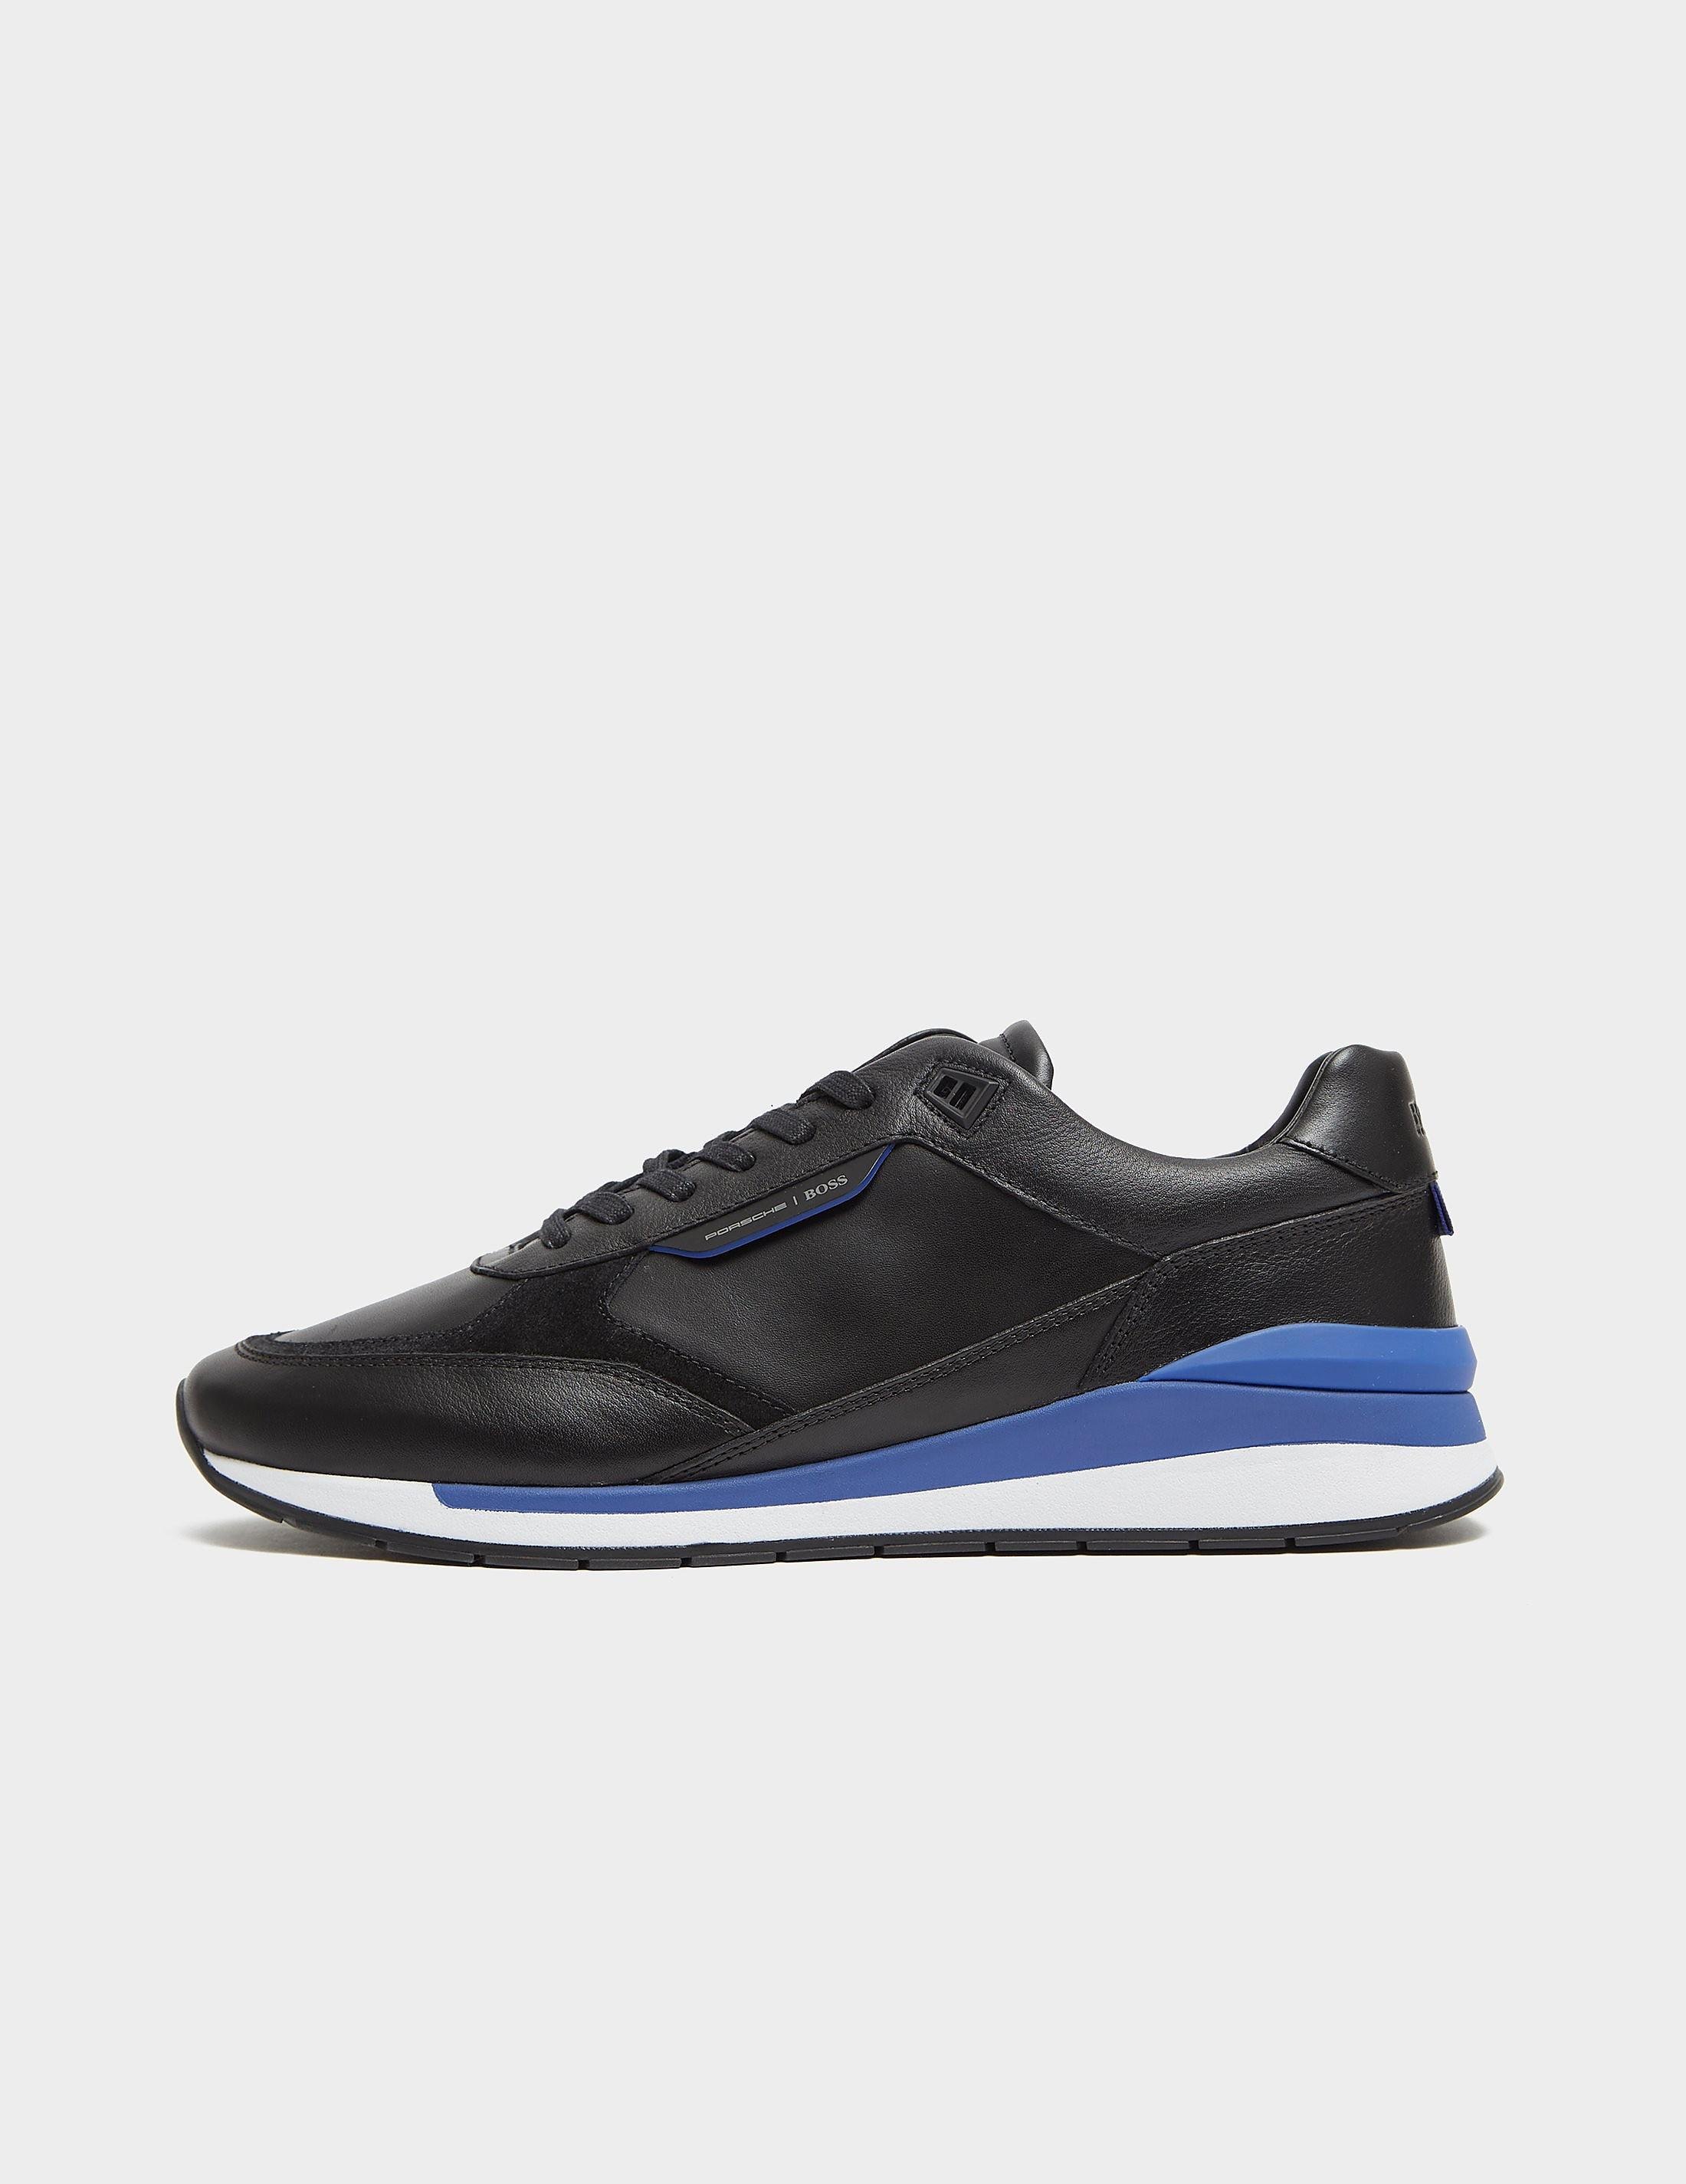 BOSS by HUGO BOSS Leather X Porsche Element Runners Trainers in Black for  Men - Lyst